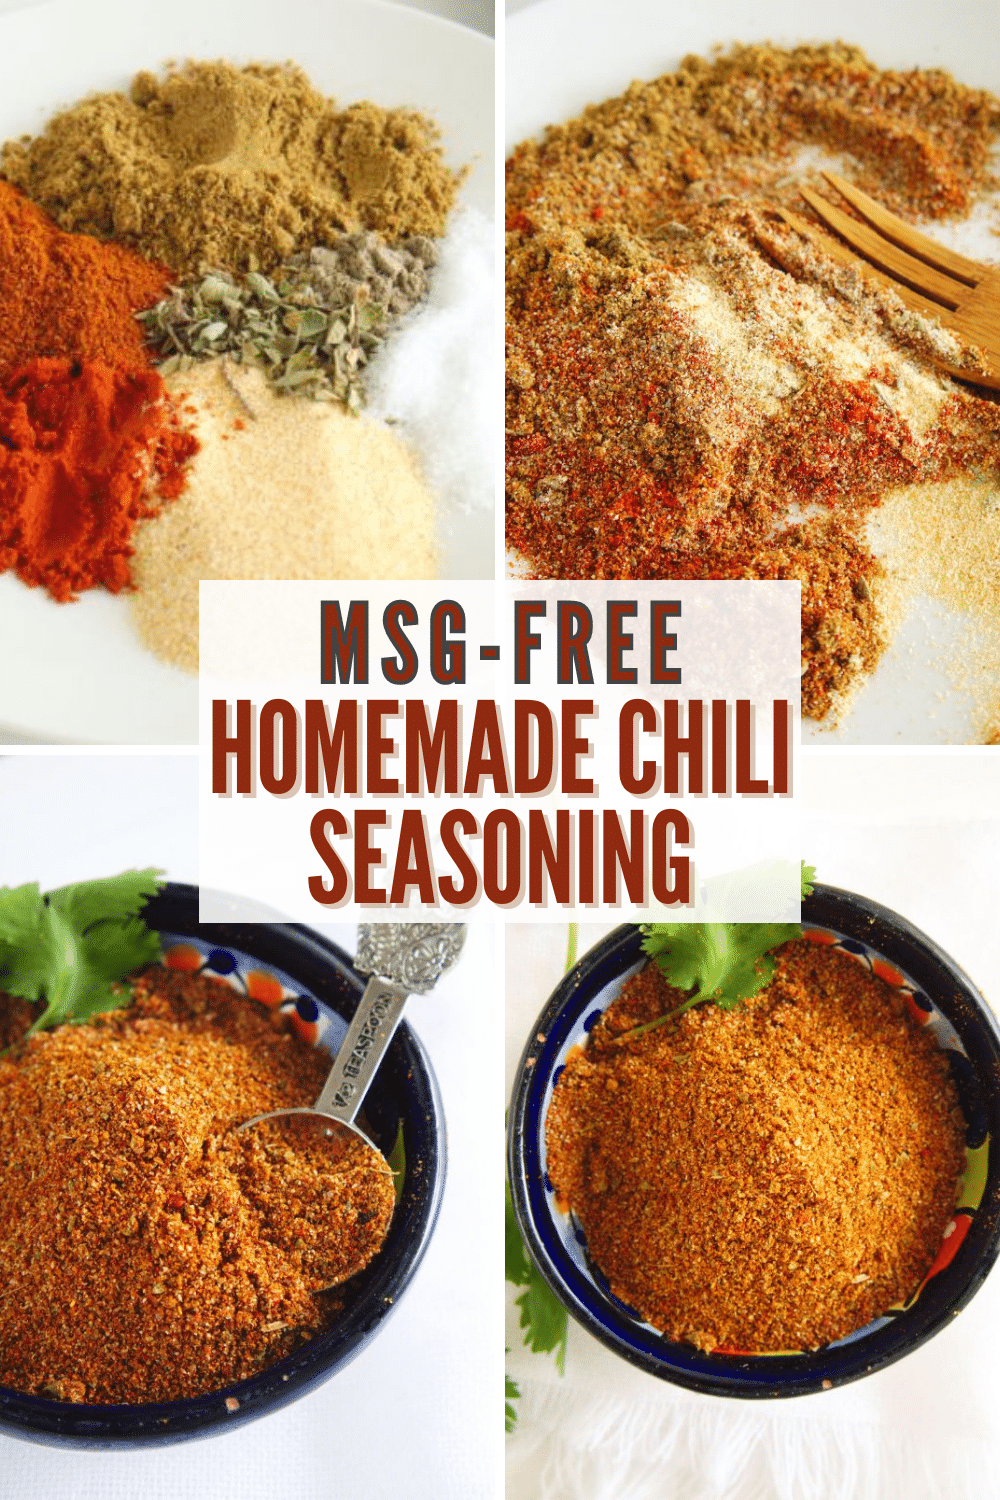 This Homemade Chili Seasoning is MSG-free and you can control how much salt you add to the mixture. A great seasoning mix for many different recipes. #chili #seasoningmix #homemadeseasoningmixes via @wondermomwannab